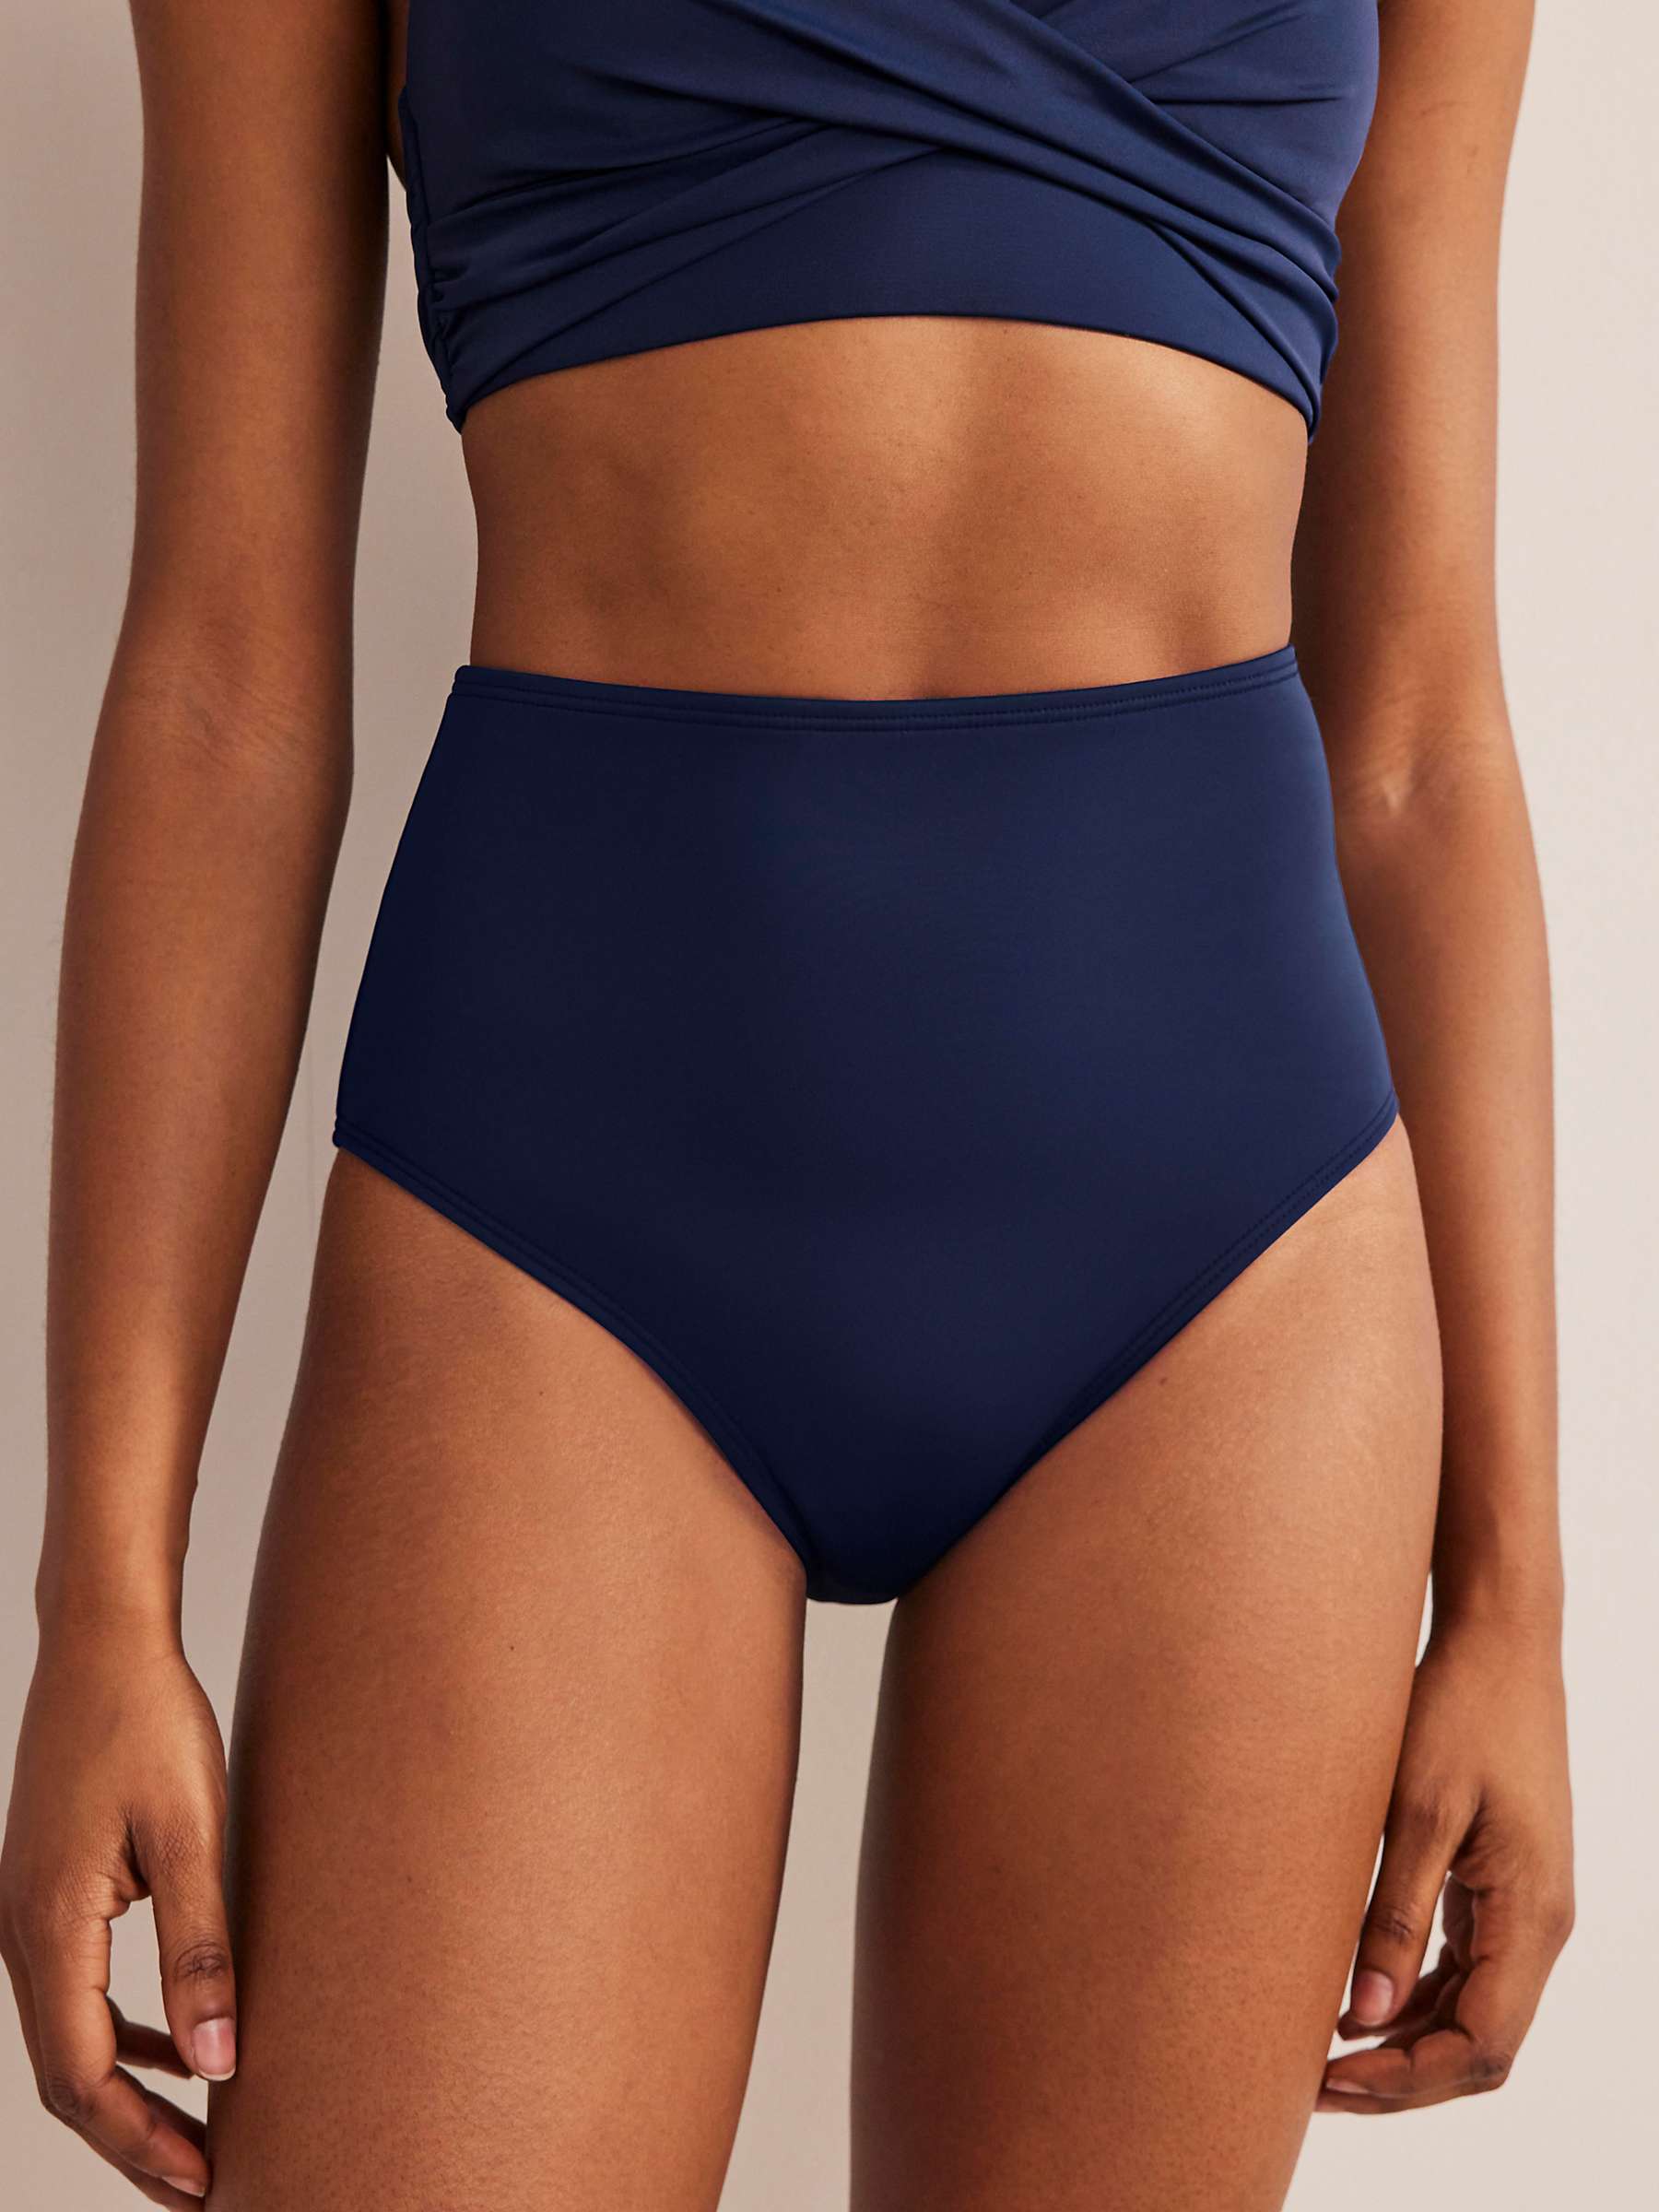 Buy Boden High Waisted Bikini Bottoms, French Navy Online at johnlewis.com